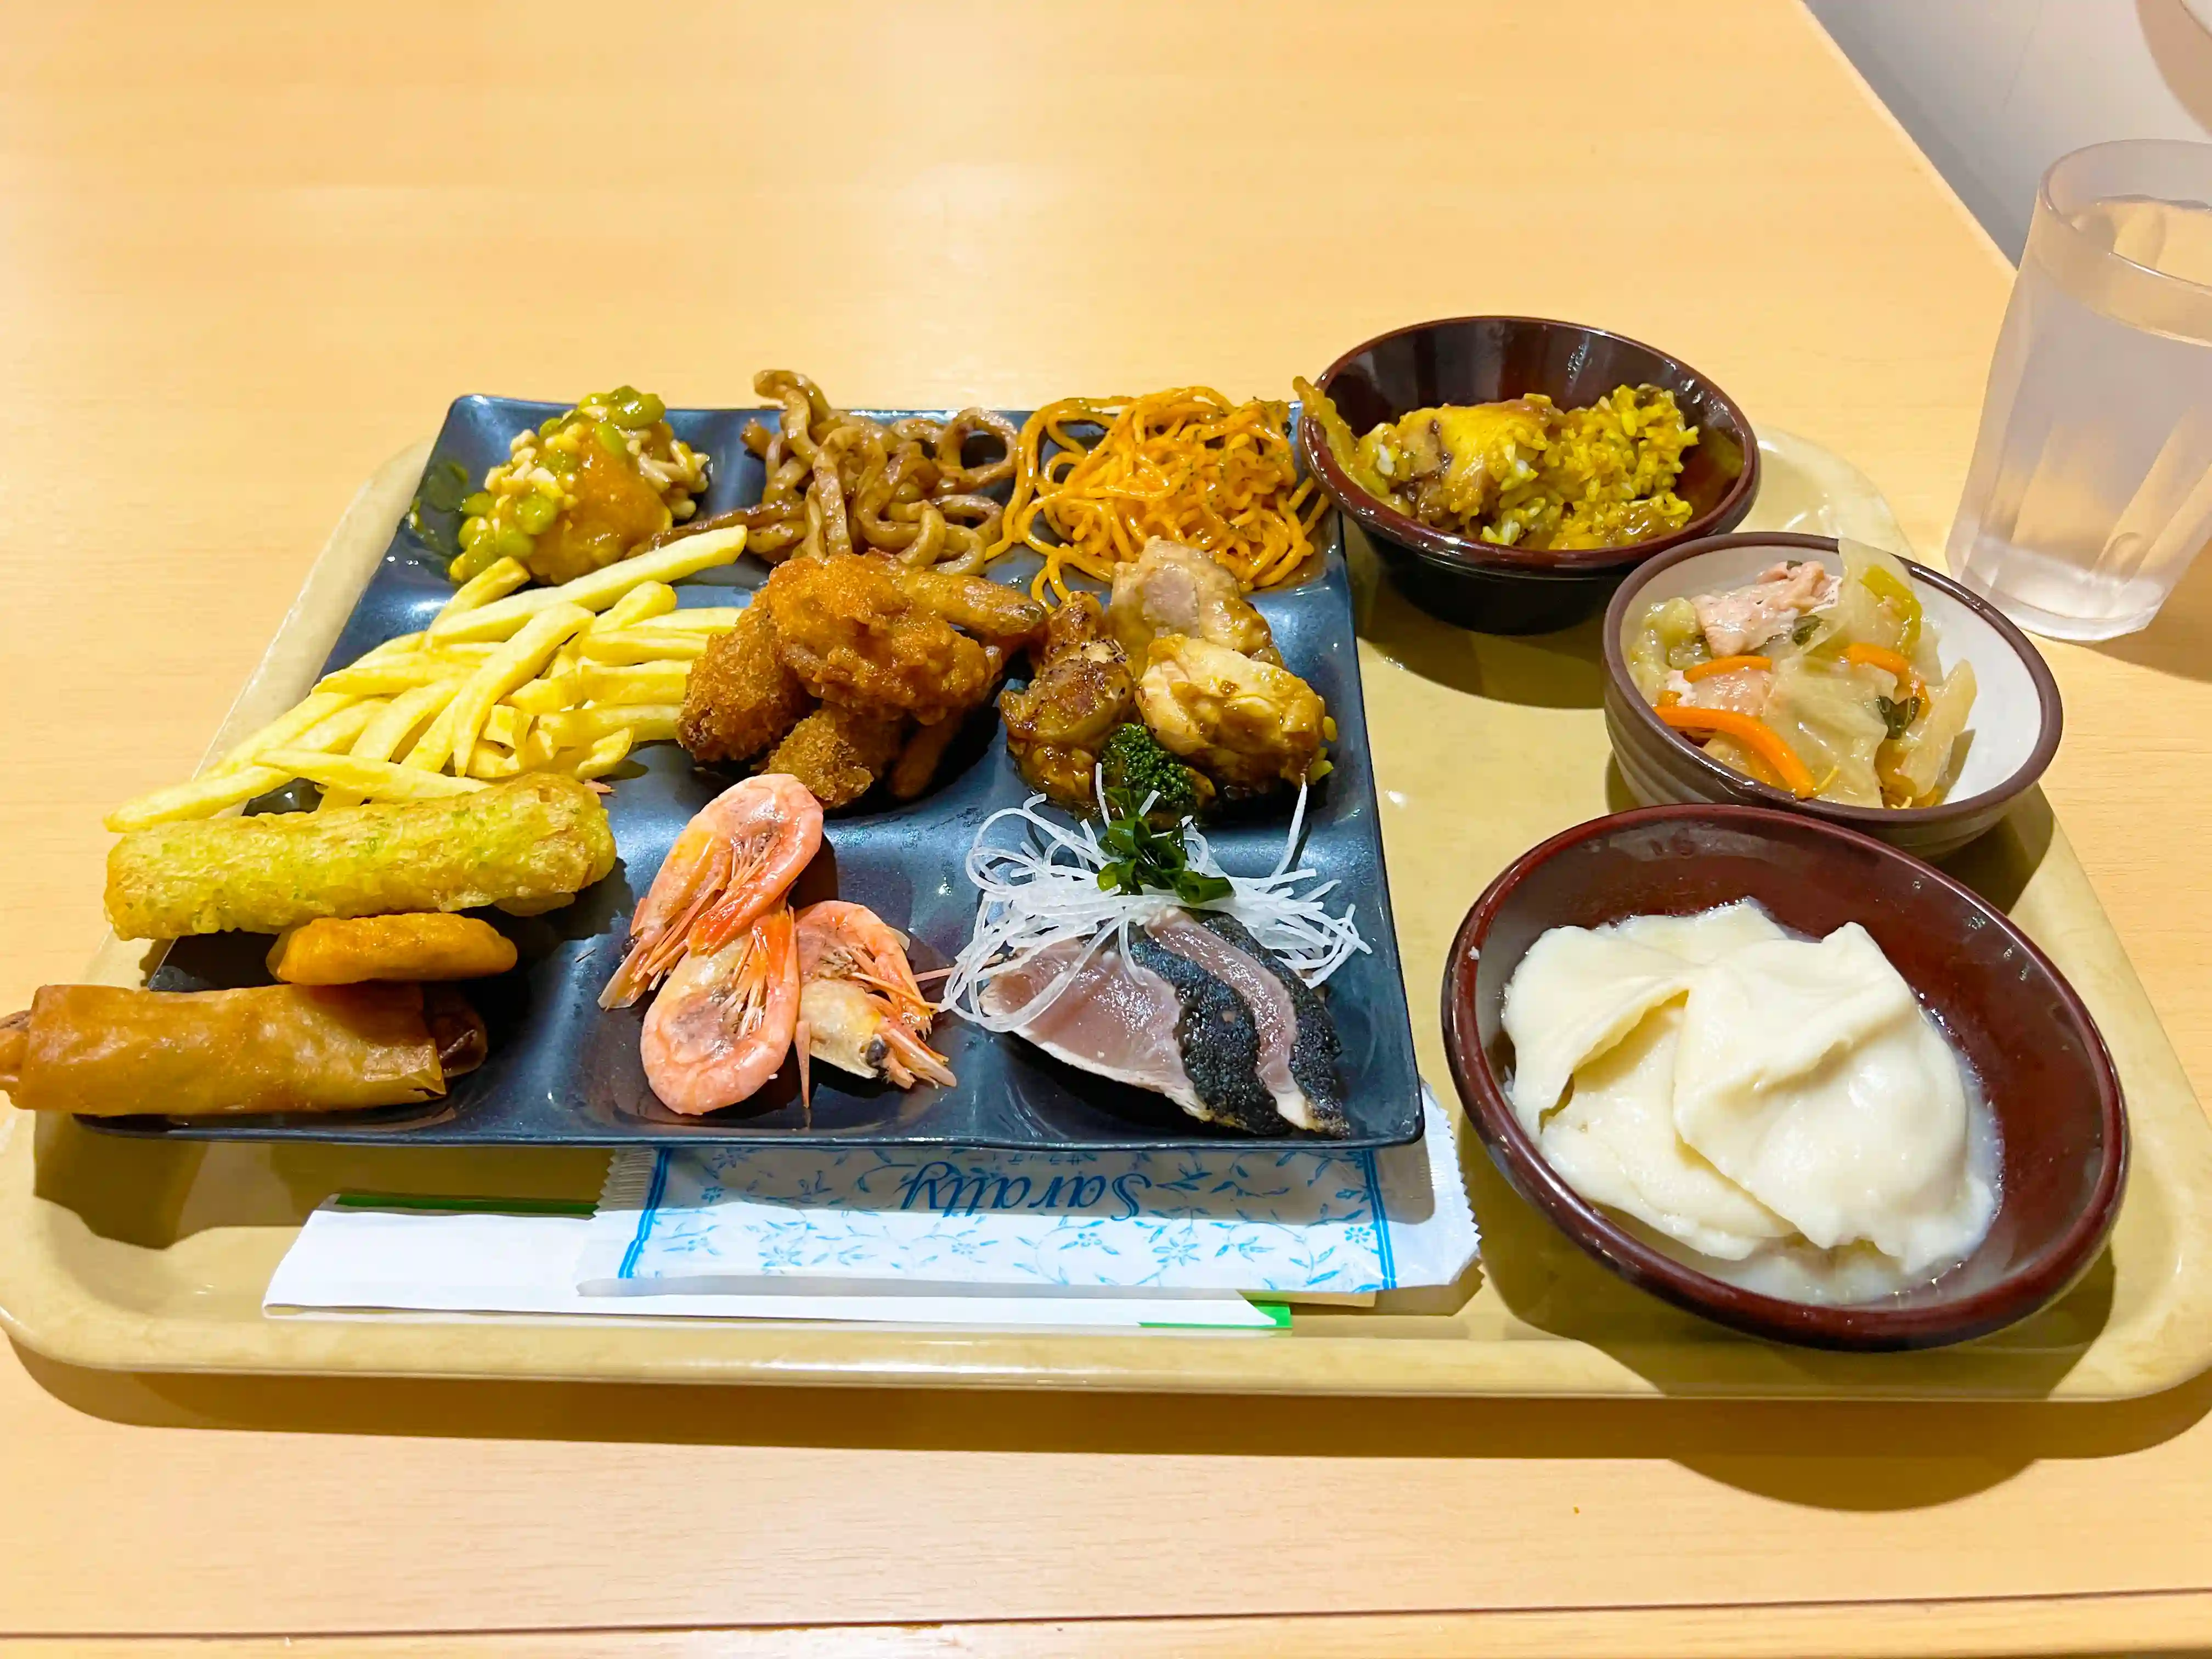 Plate of Dinner Dishes on Meimon Taiyo Ferry Kyoto